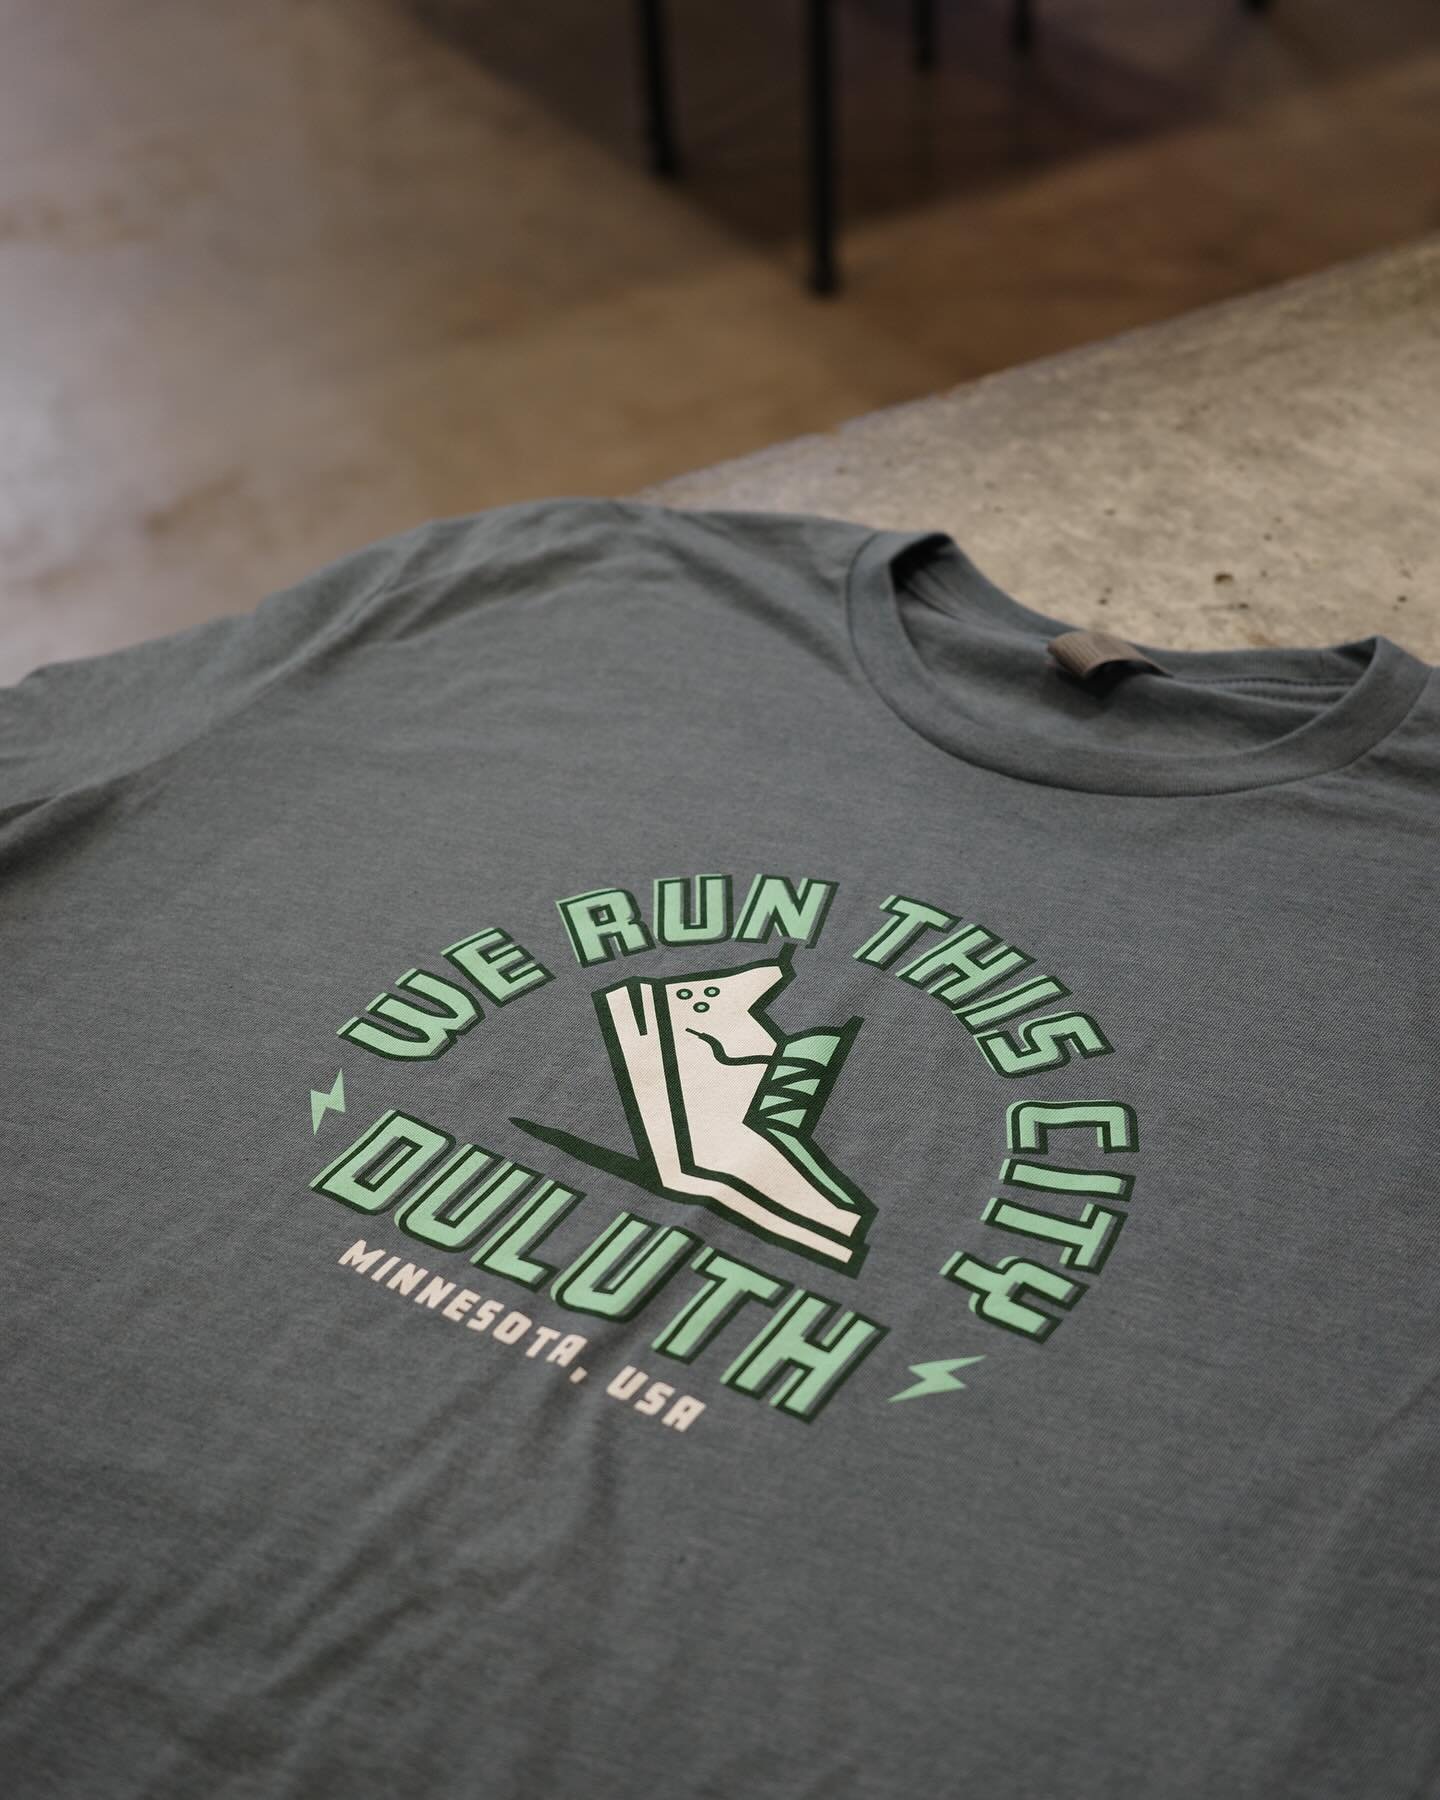 🏃🏻&zwj;➡️ WE RUN THIS CITY 🏃🏽&zwj;♀️&zwj;➡️
&bull;
Our MARATHON EXCLUSIVES sell out every year so this year we&rsquo;ve brought in an early batch so you can get yours before all the festivities this summer! Keep on runnin&rsquo; Duluth! 👟🚩
&bul